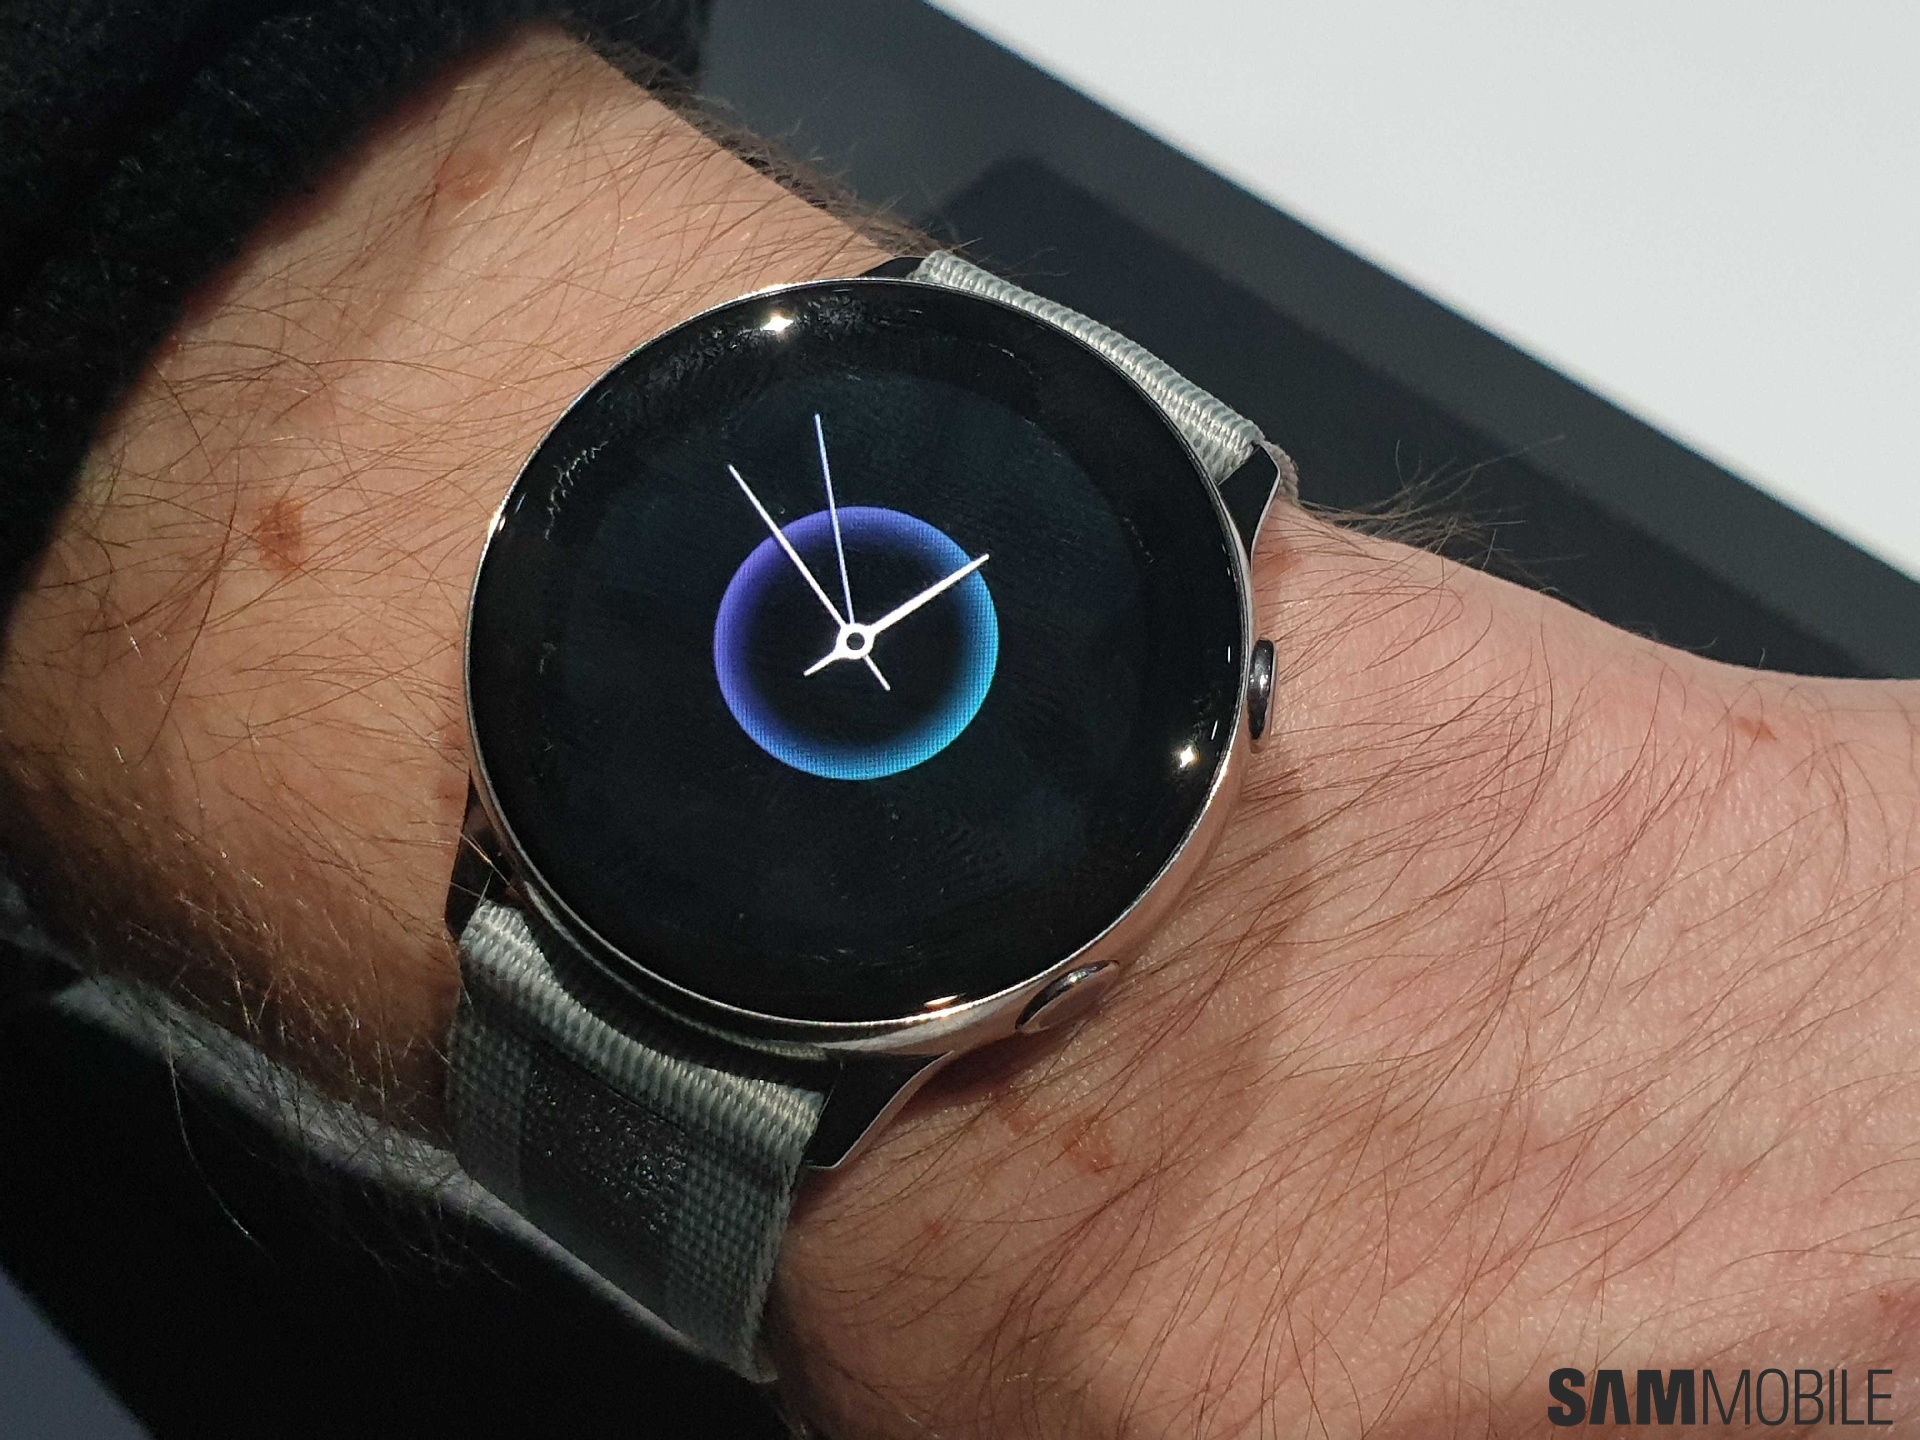 Samsung Galaxy Watch Active hands-on: UI bezel ring out SamMobile